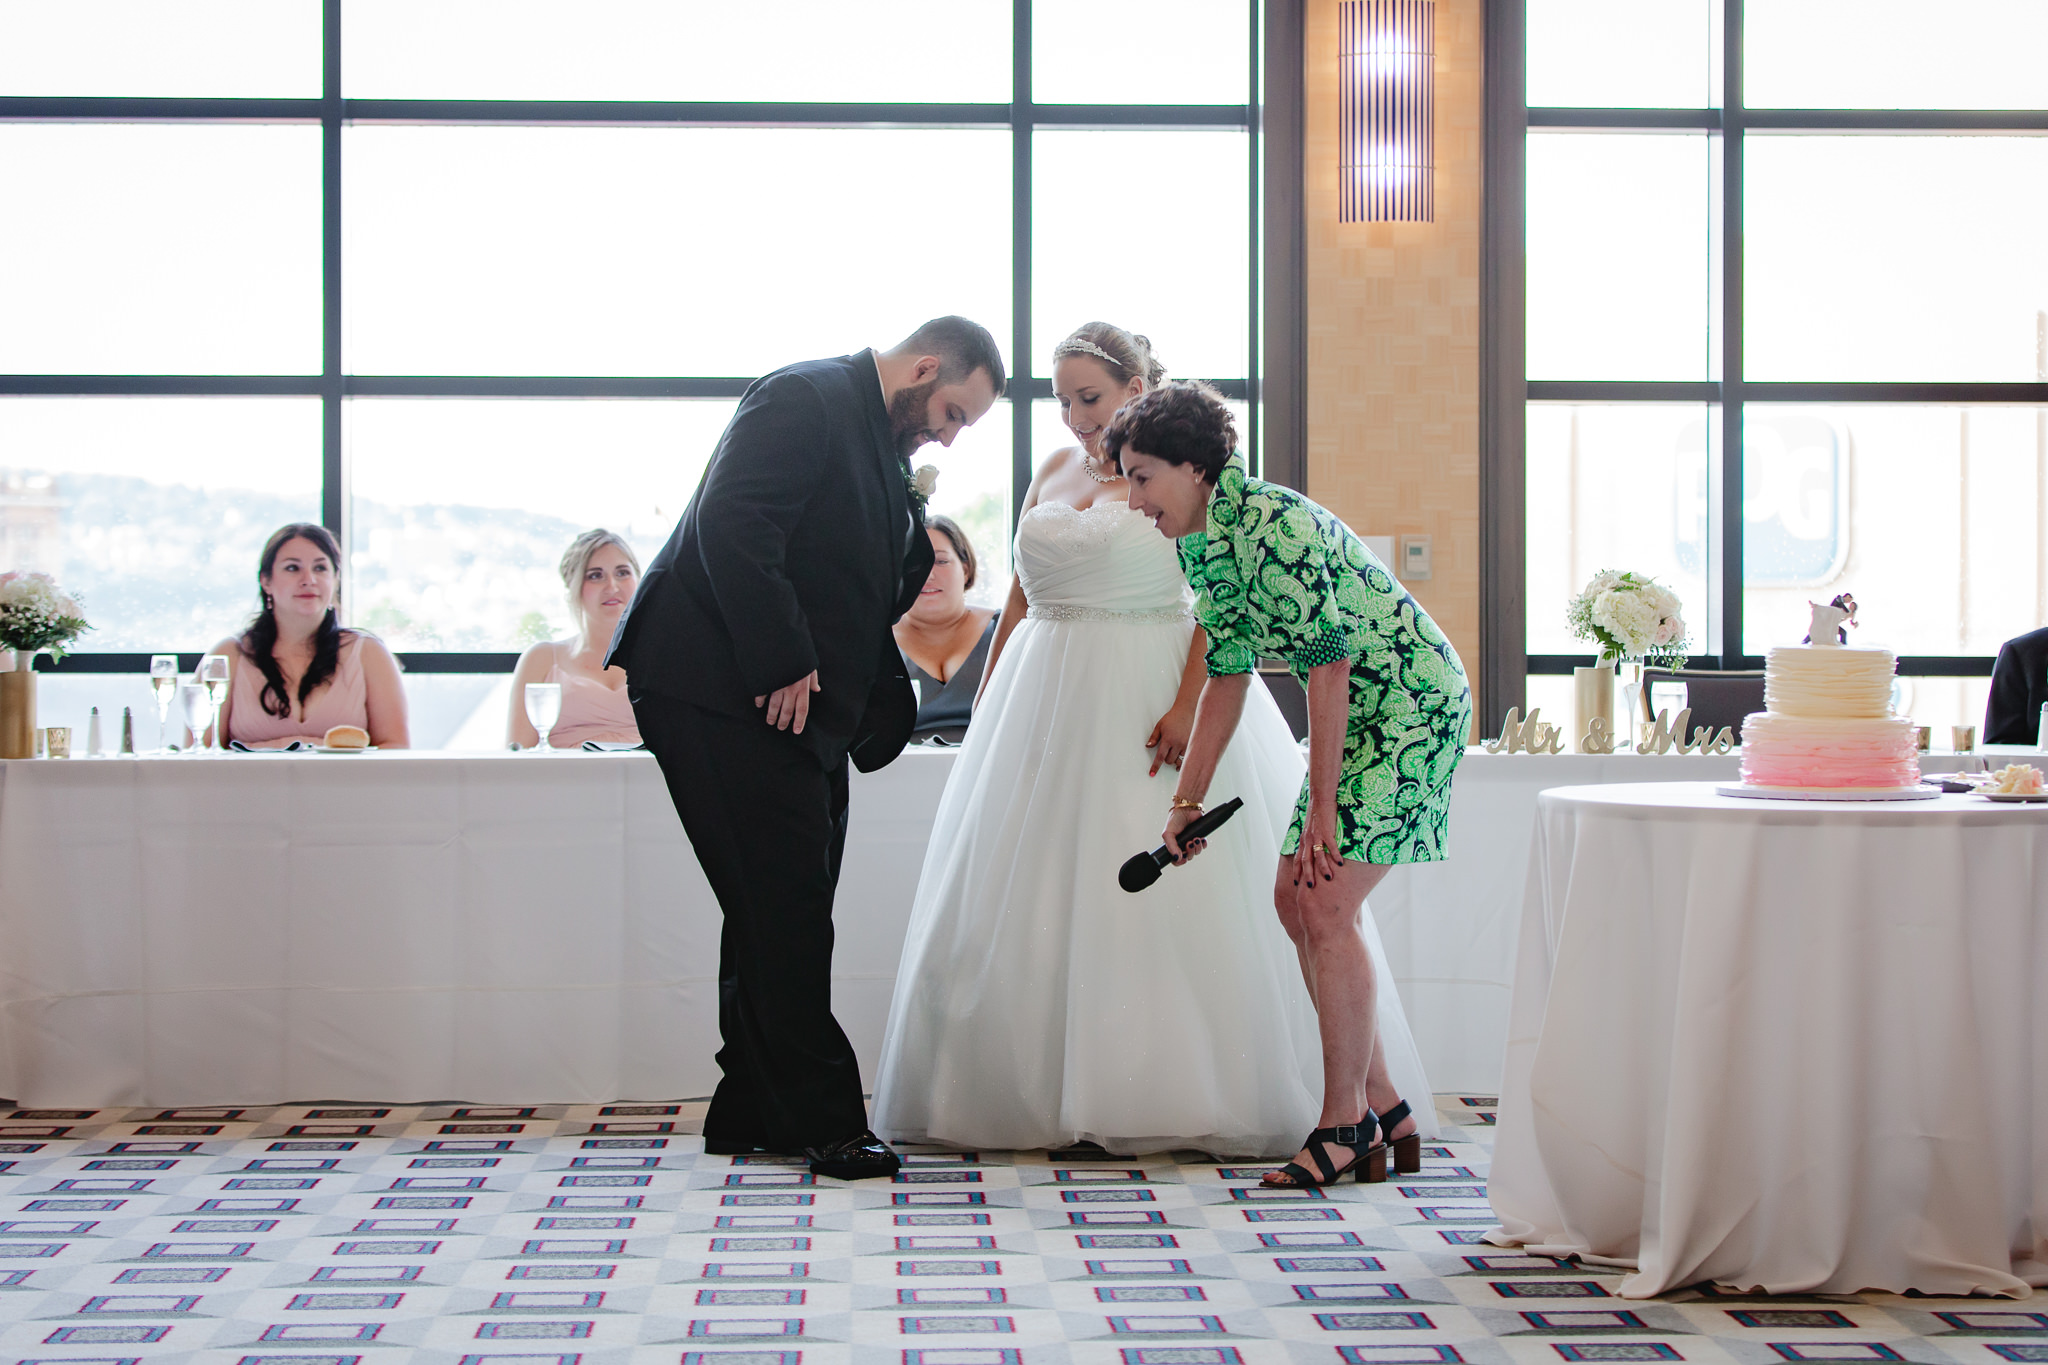 Groom breaks the glass at his Duquesne University wedding